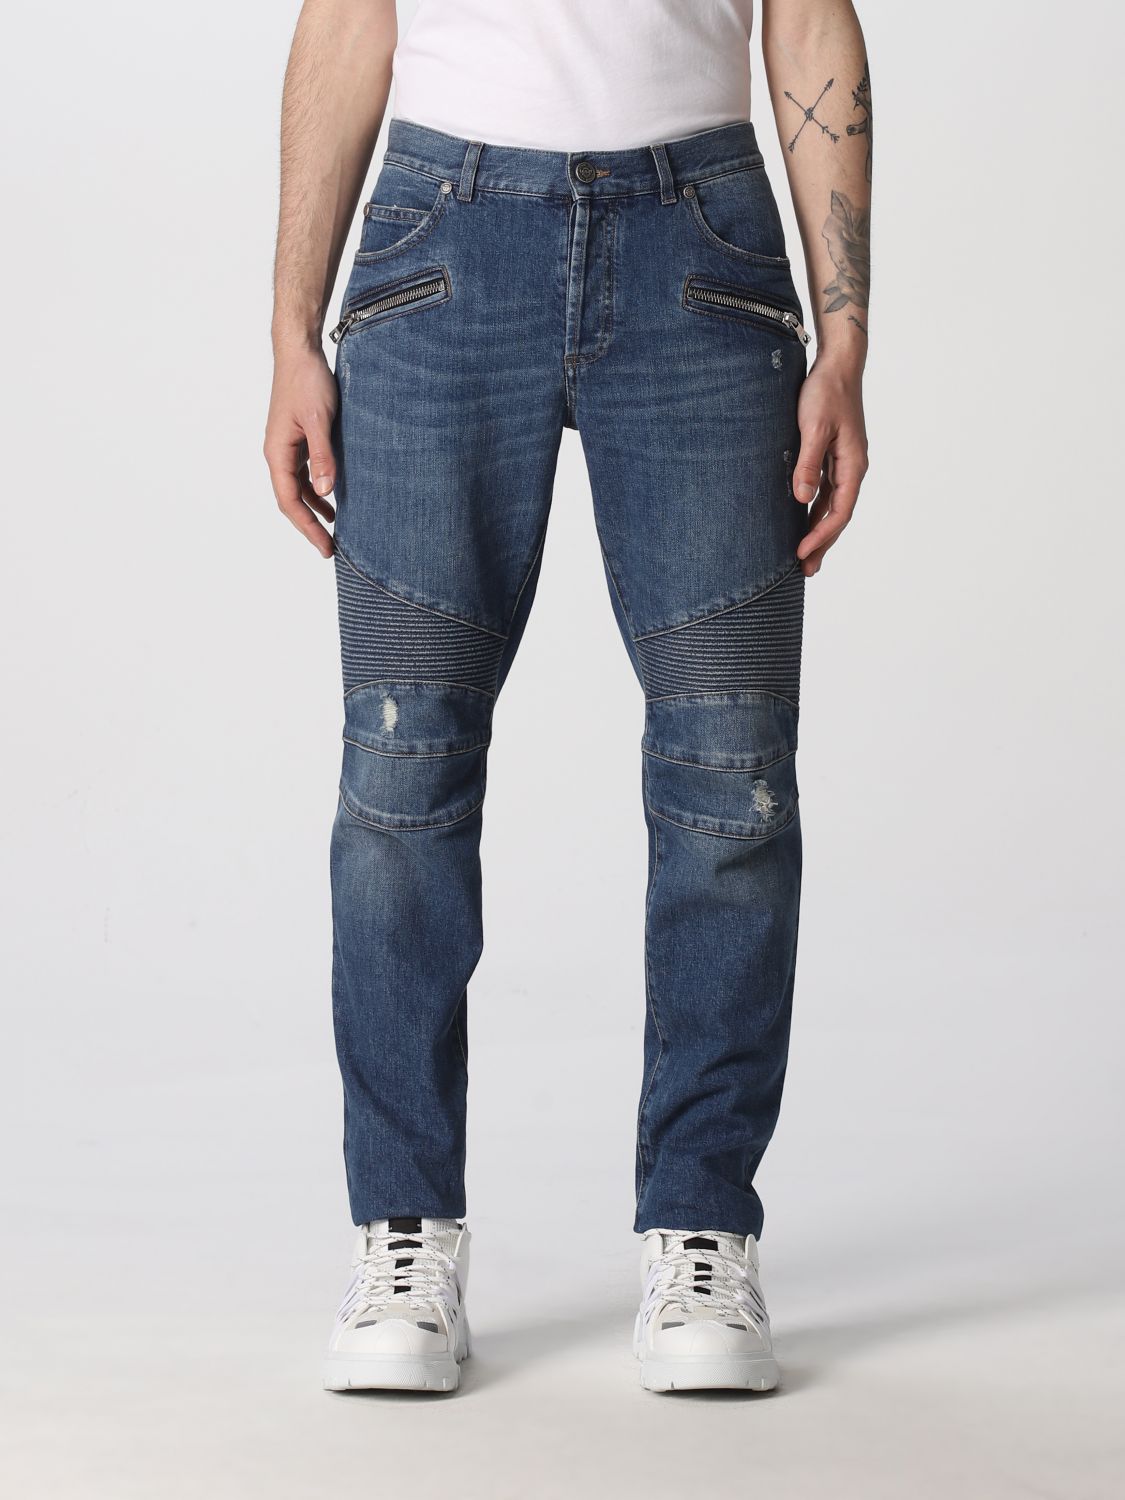 Balmain jeans in washed ripped denim